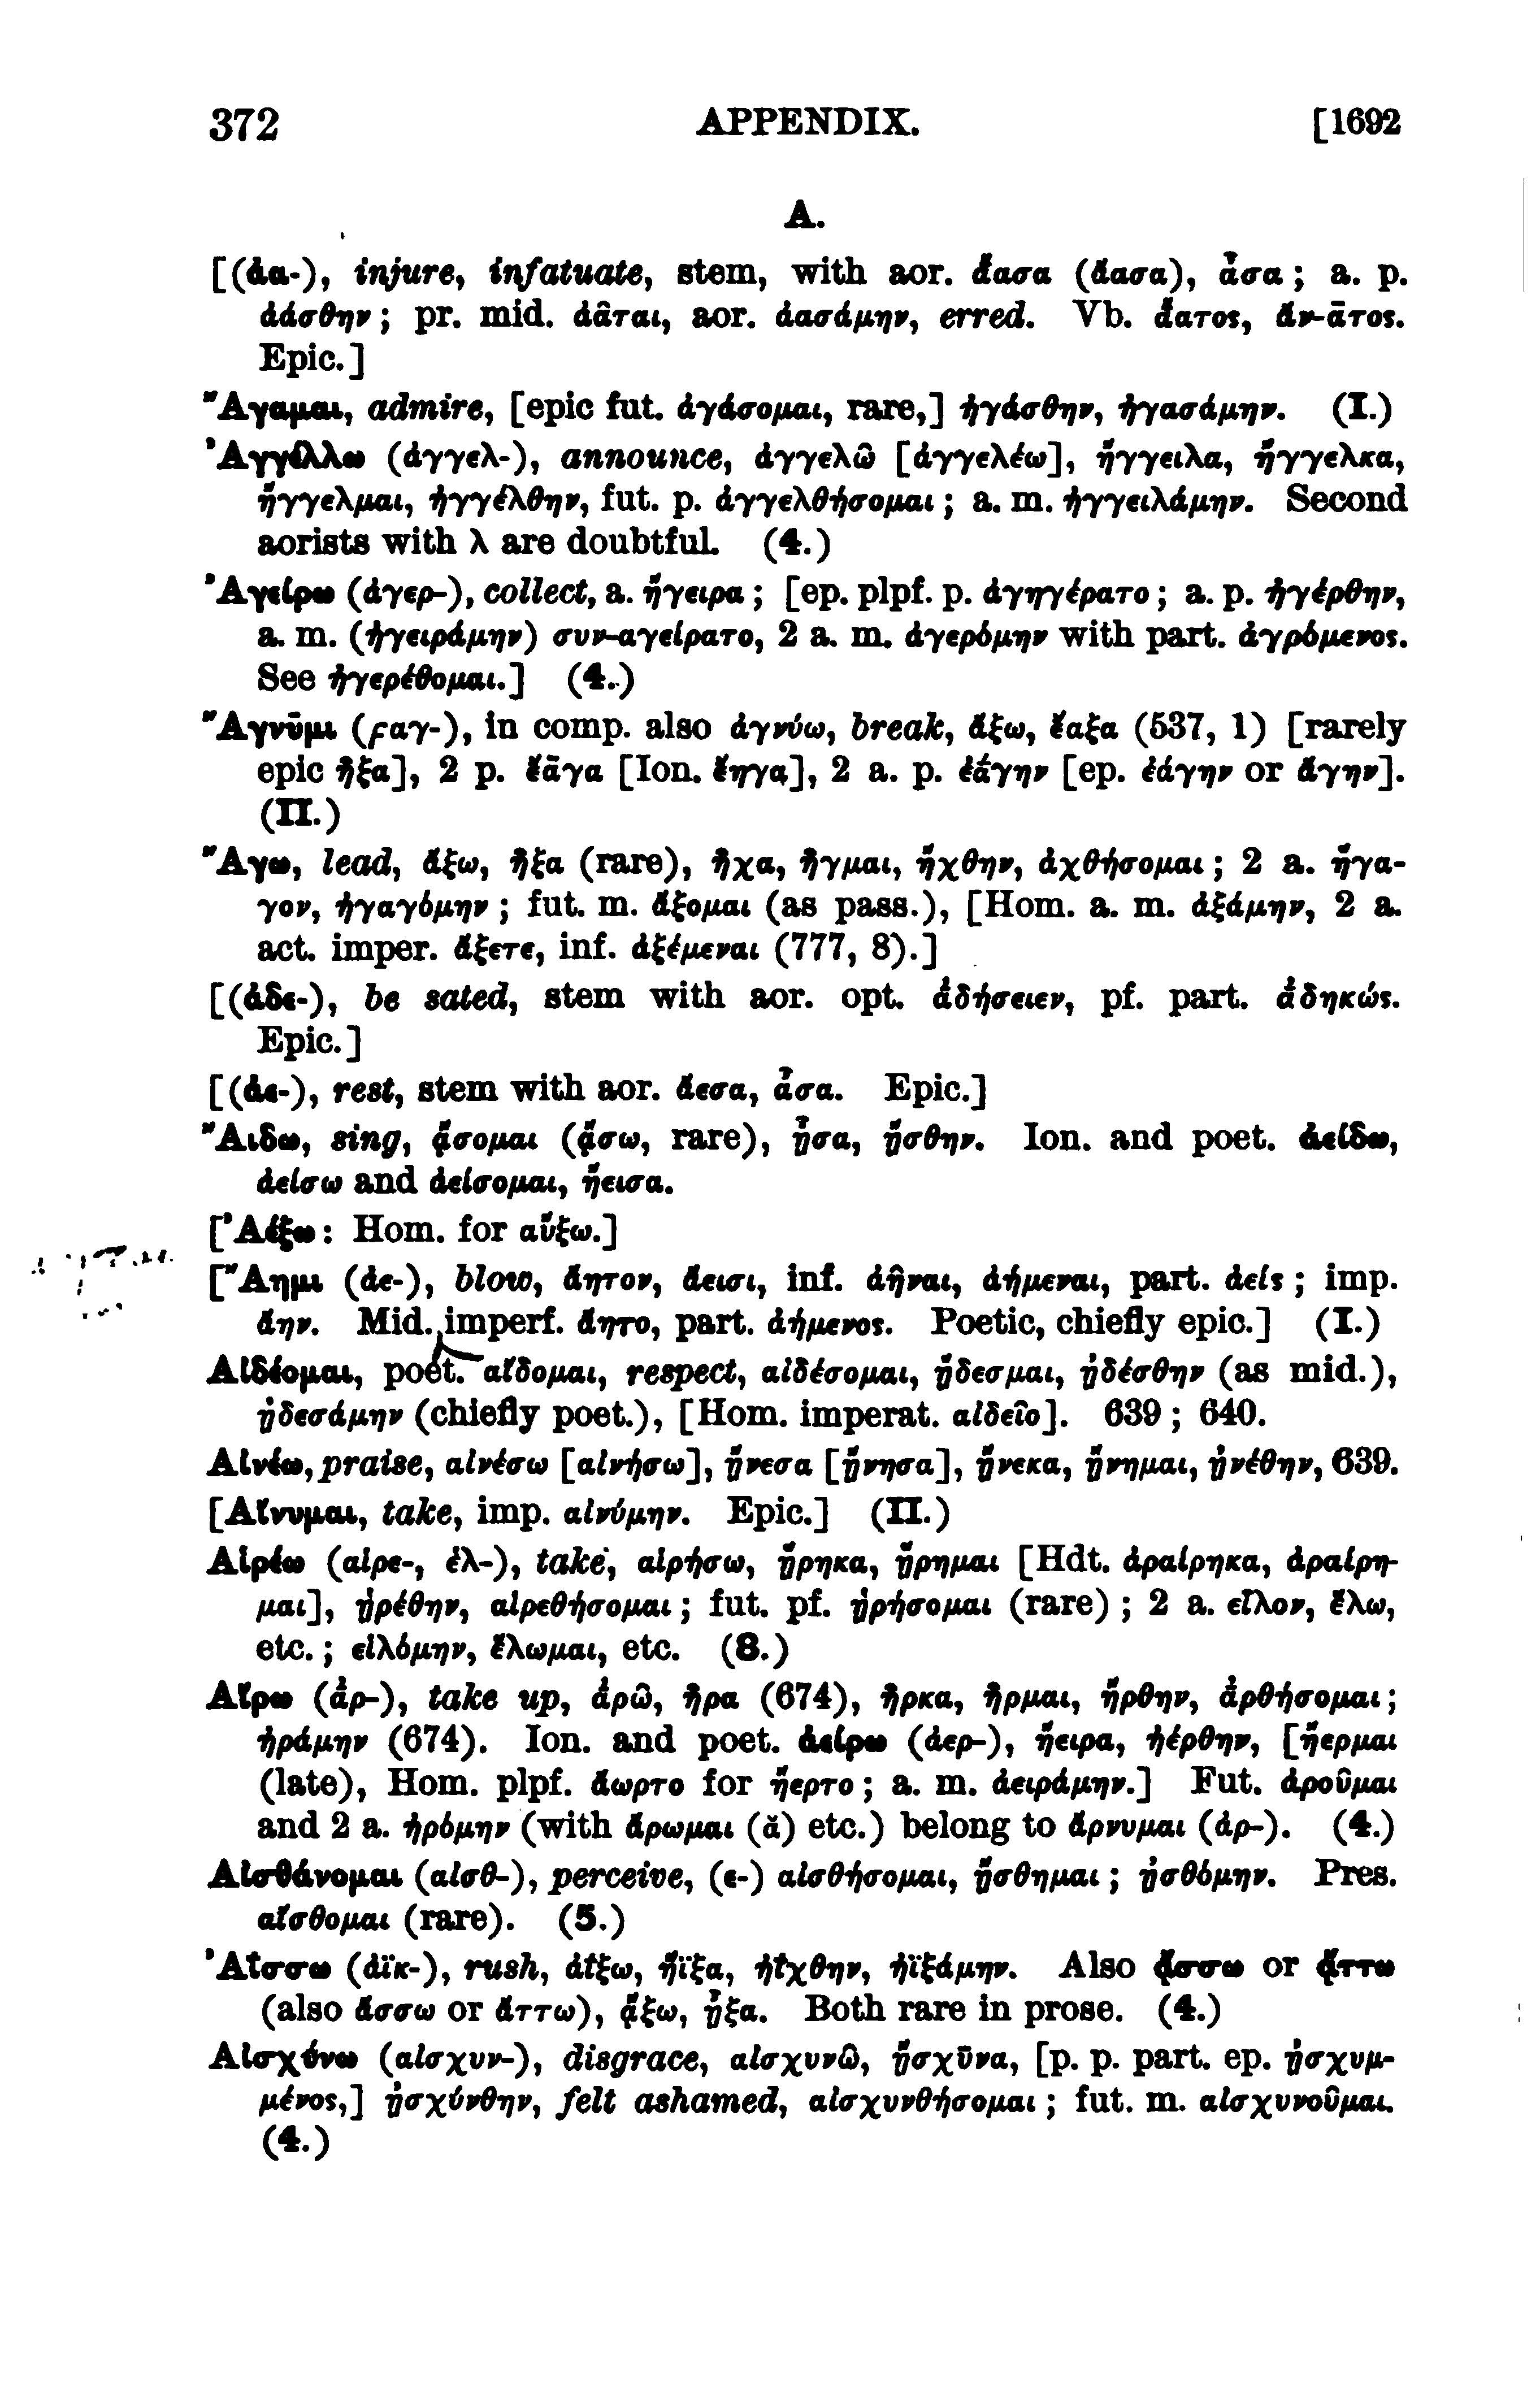 page from Goodwin's catalogue of verbs